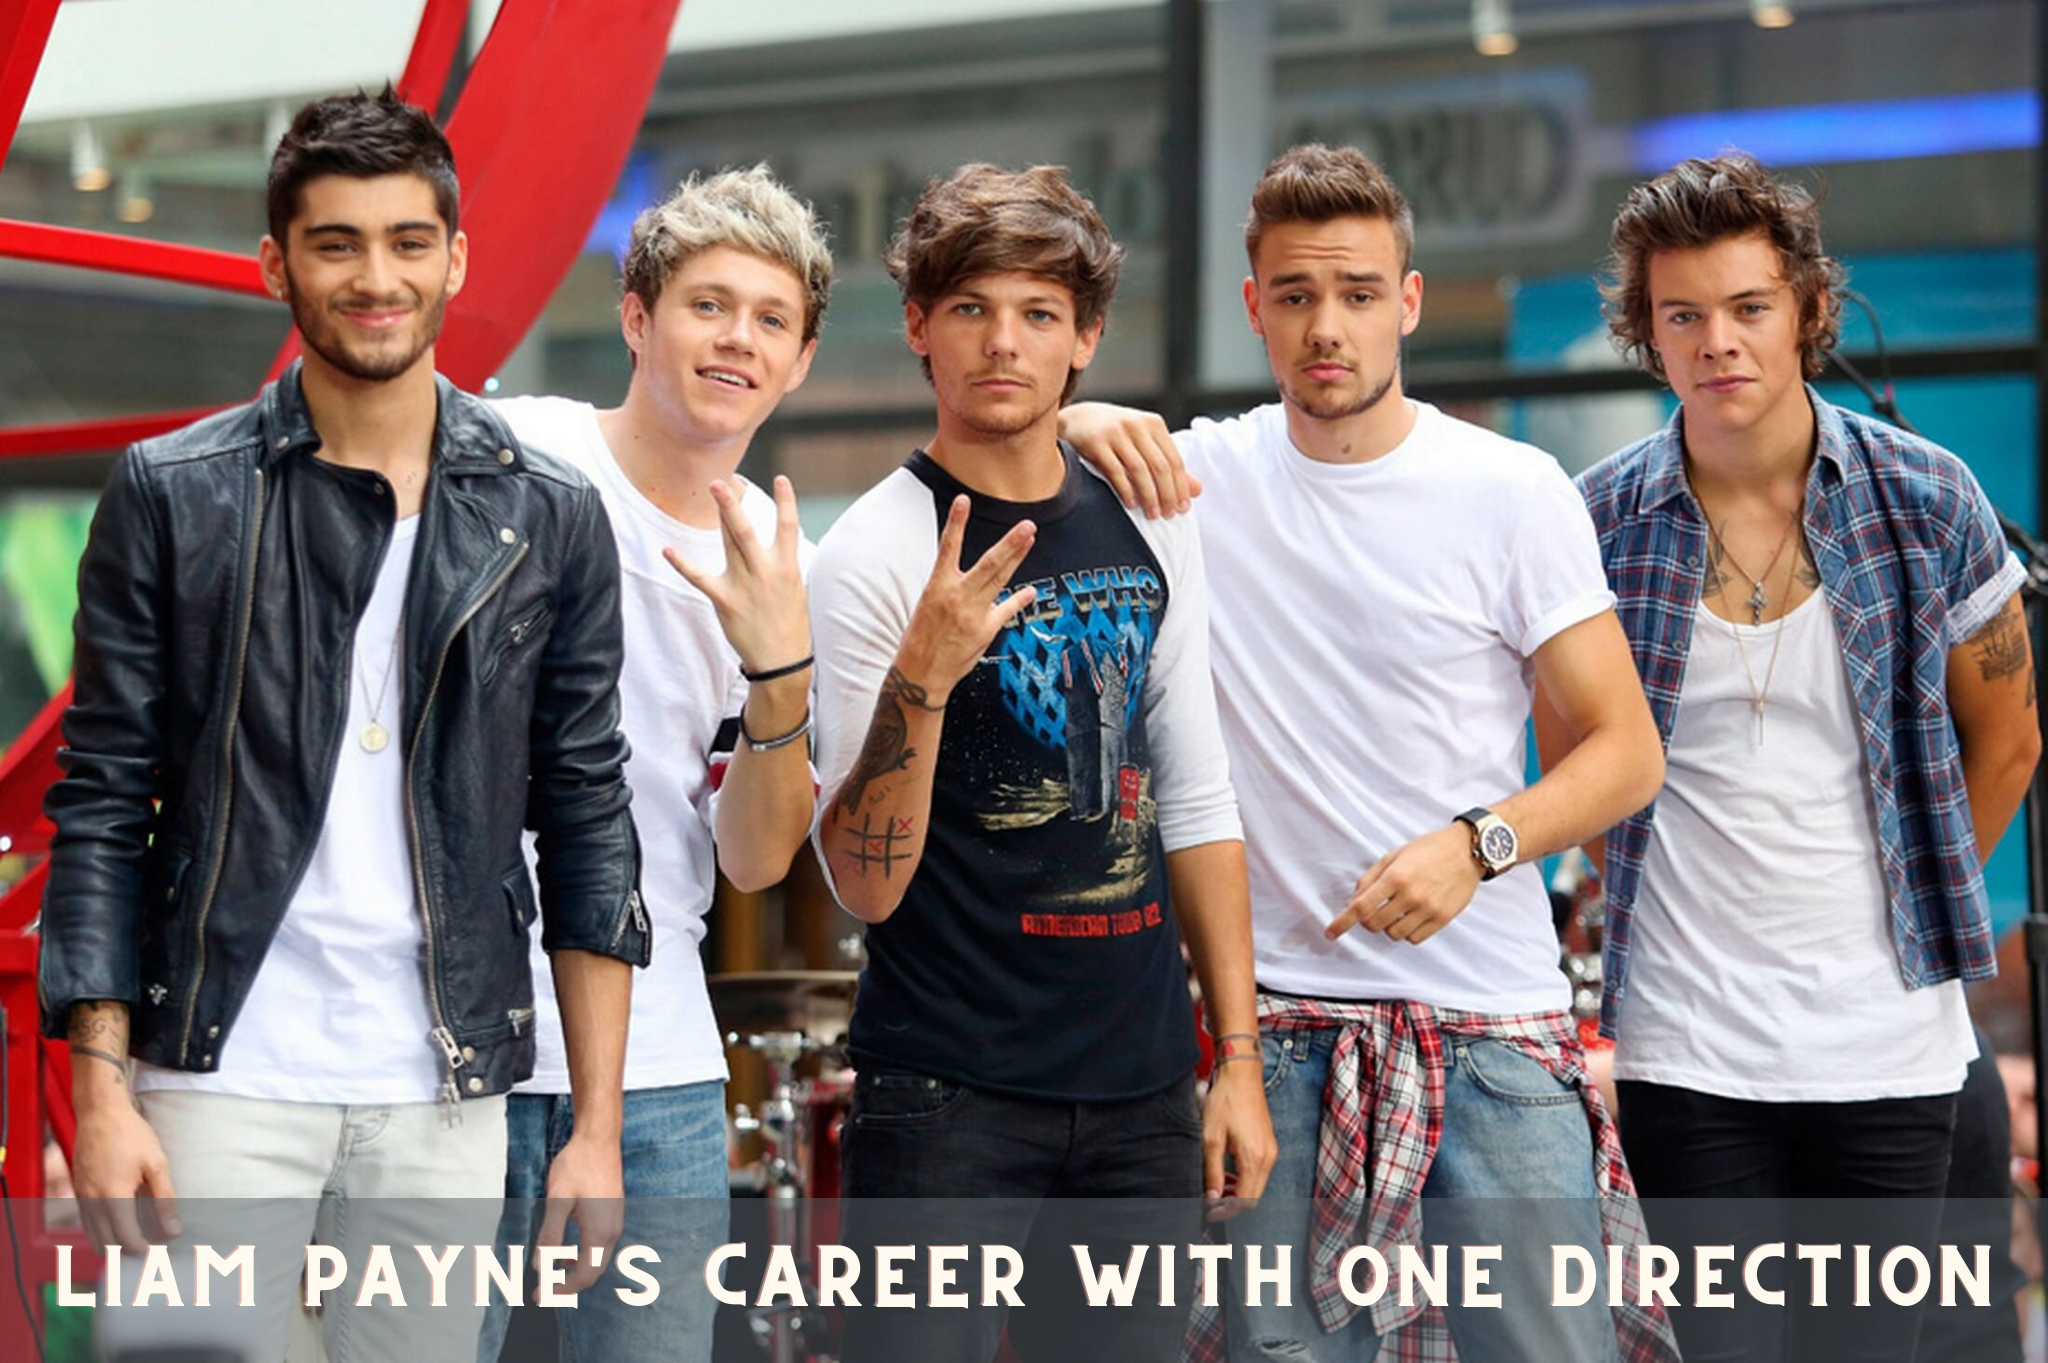 Liam Payne's Career with One Direction